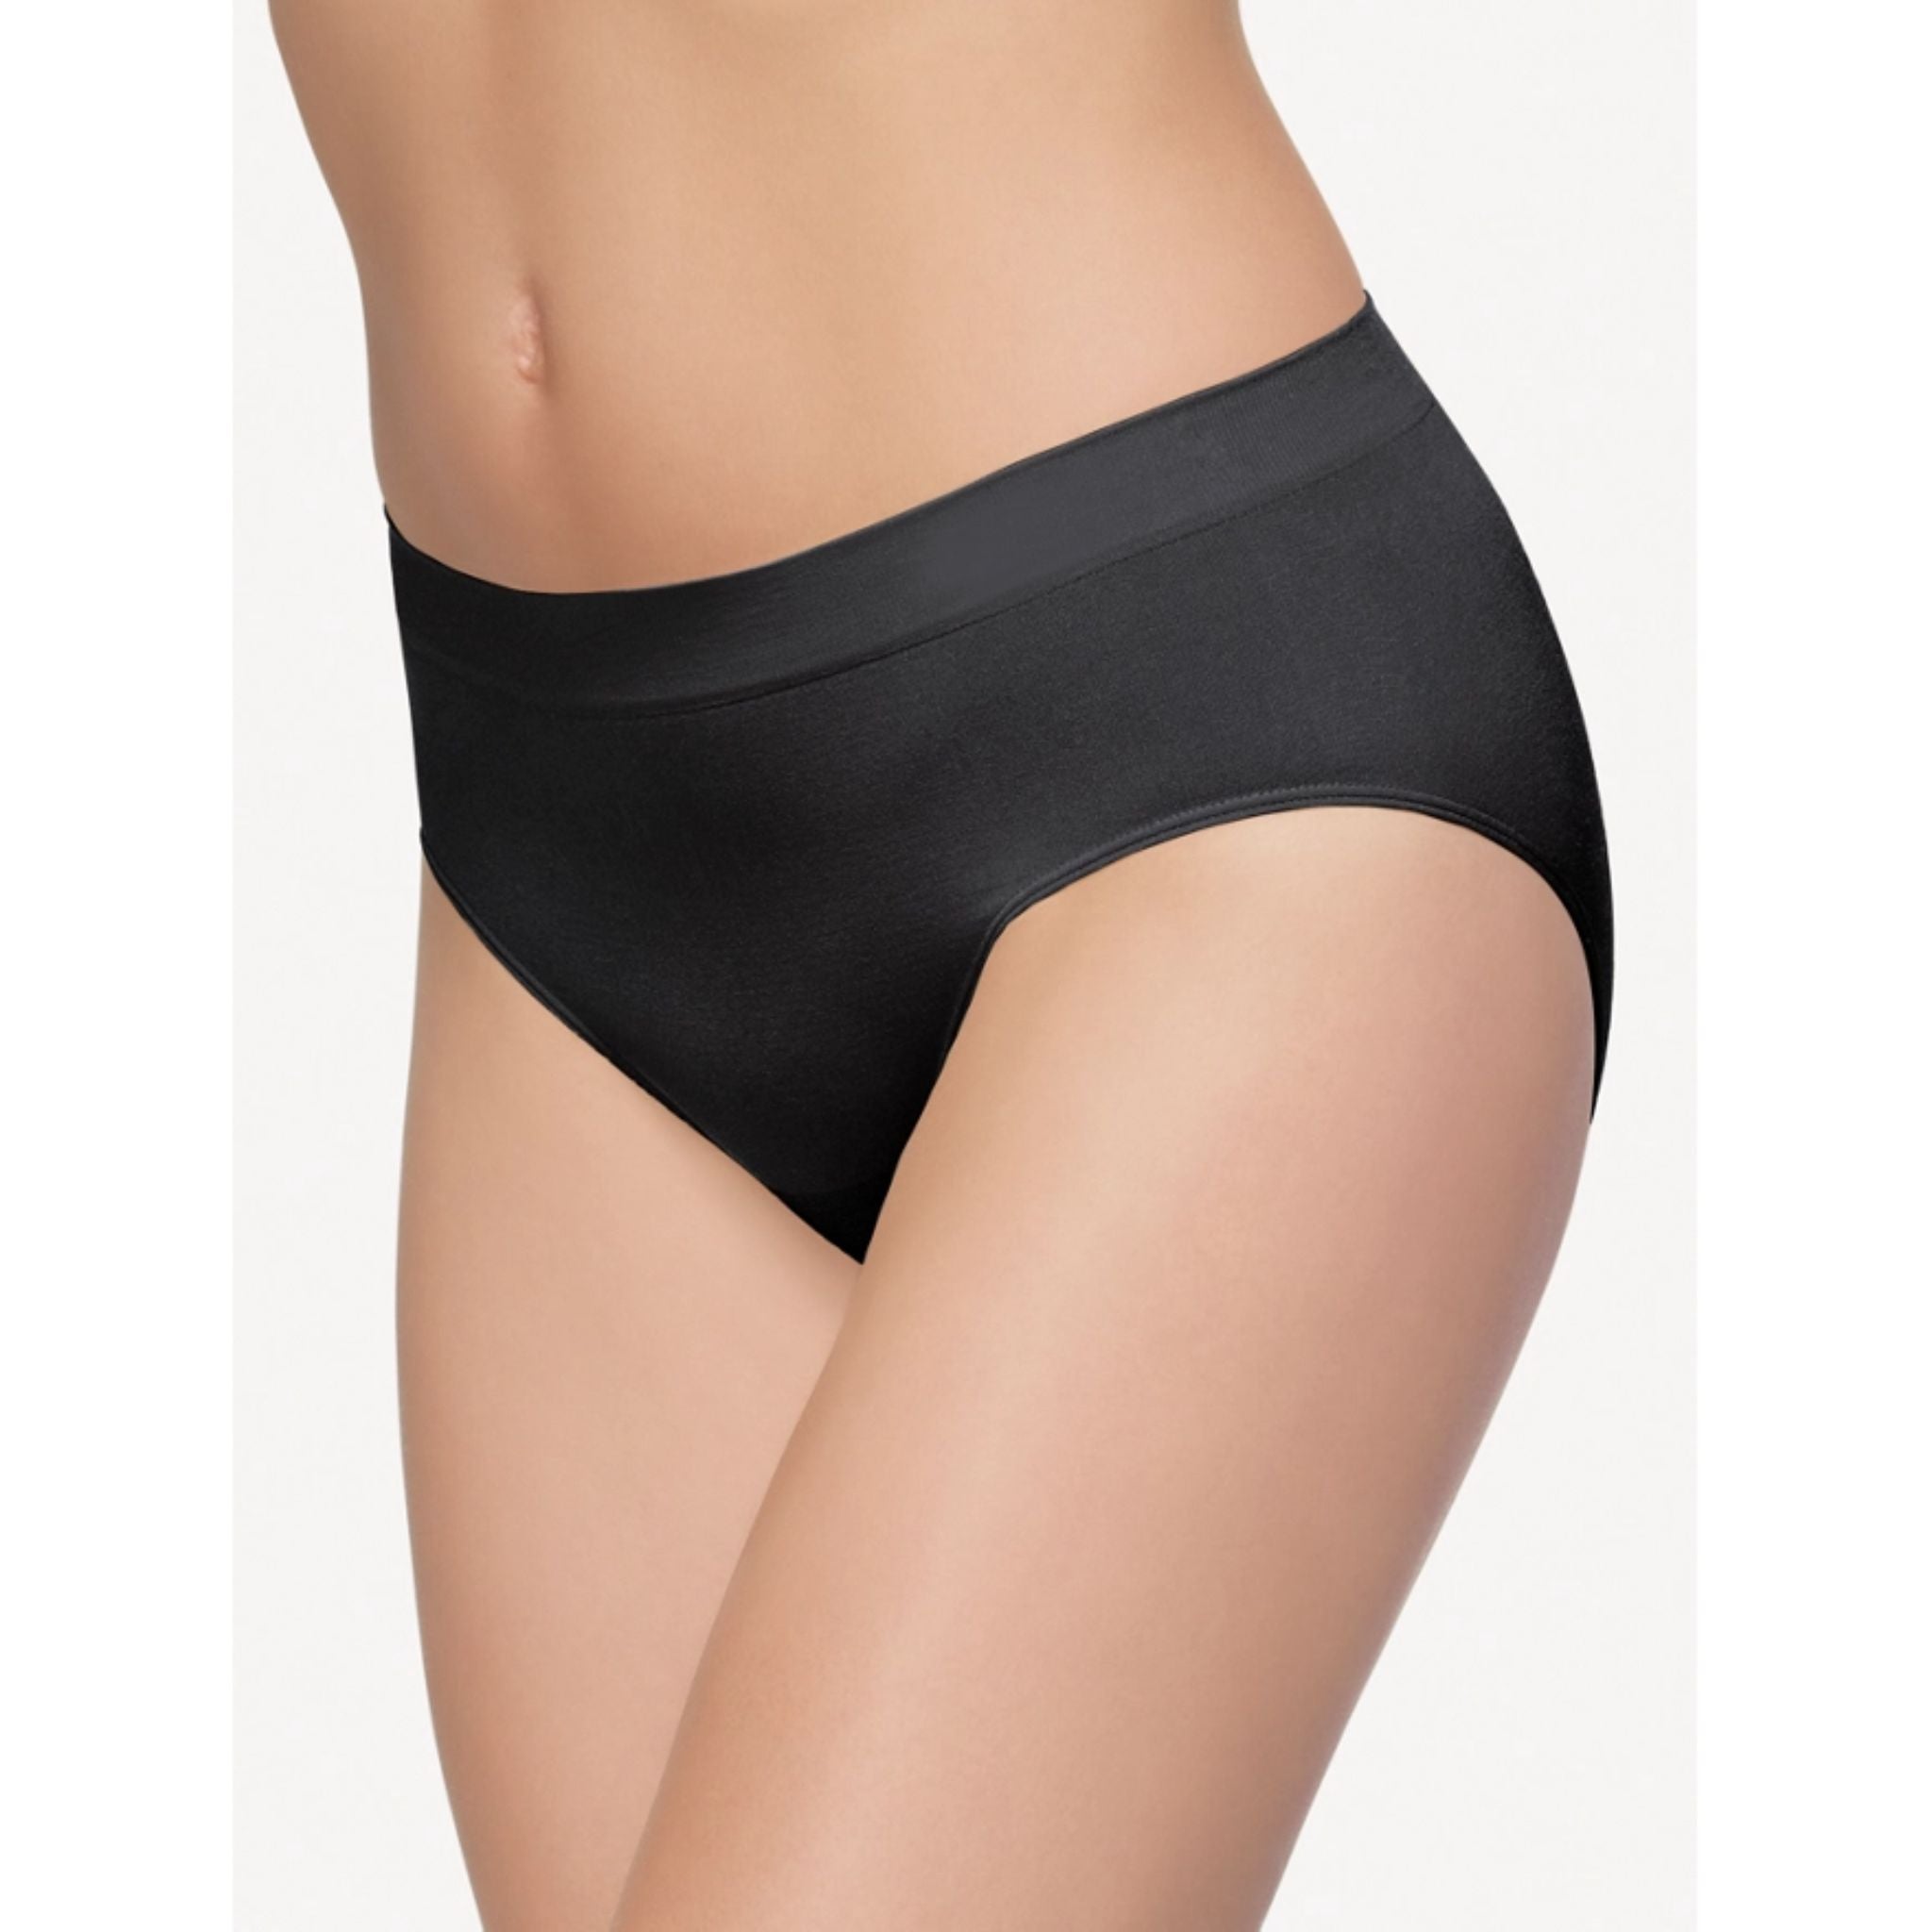 The perfect everyday panty because it’s smooth and seam-free. Part of Wacoal's best-selling collection with fabric so soft you’ll never want to take it off.  When you want to slip into something comfortable, try our B-Smooth Seamless Brief. This panty will be the perfect companion to all the bottoms in your wardrobe.  Seamless brief Smooth, supportive nylon/Lycra fabric Clothes glide easily over panty for a sleek look Traditional leg Totally seamless body Ruching knitted in derrière